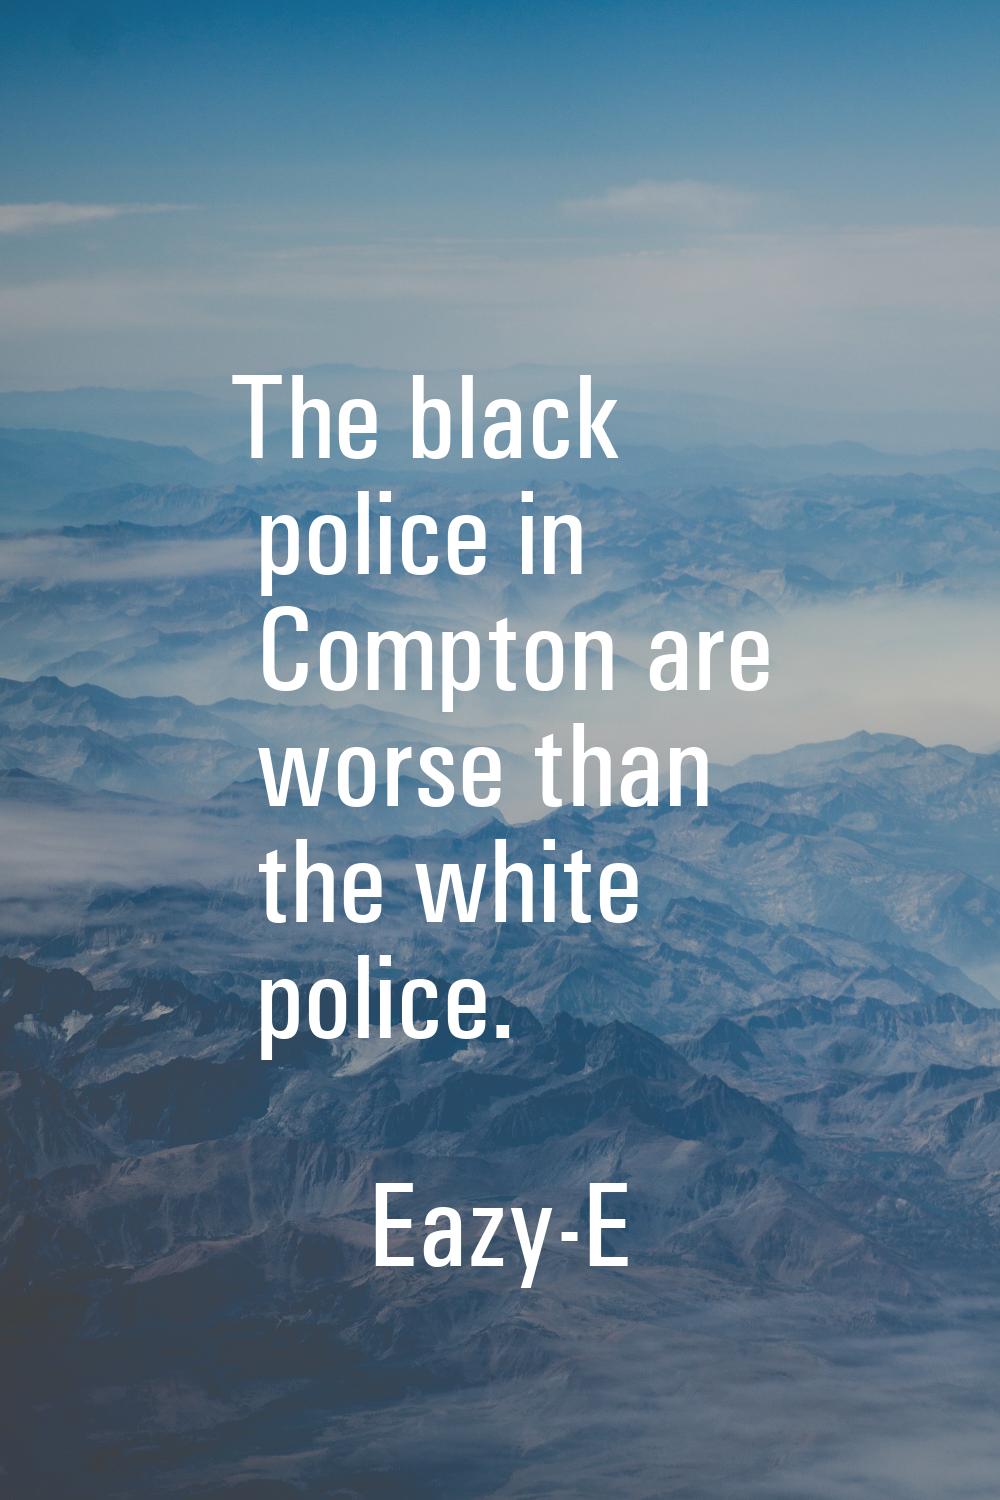 The black police in Compton are worse than the white police.